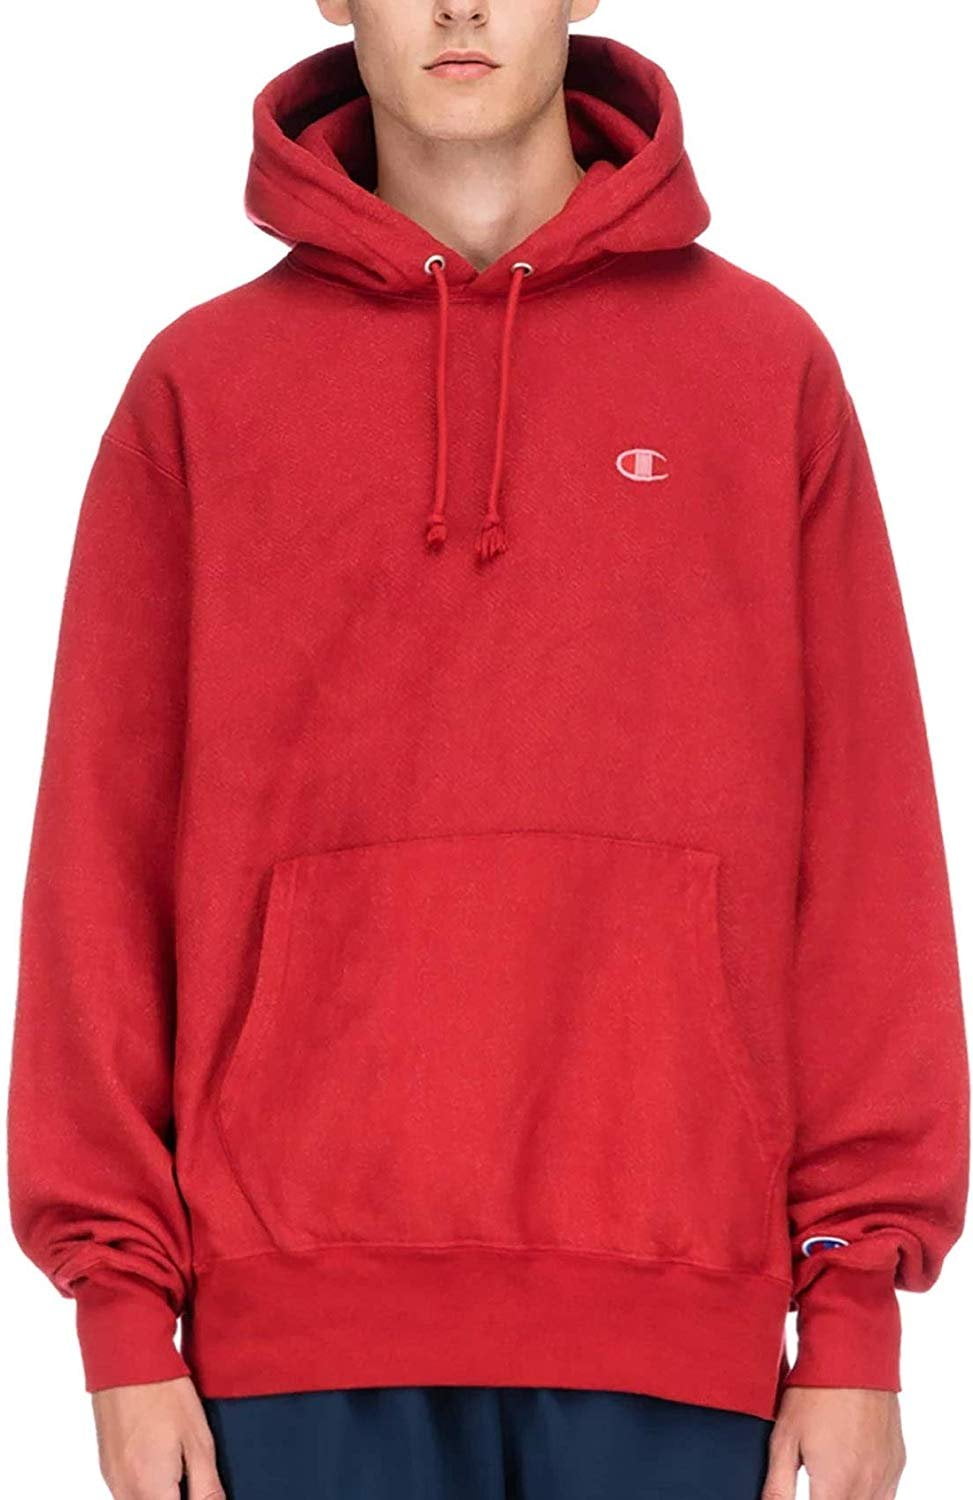 Ulydighed pinion enkelt gang Champion Men's Reverse Weave Pullover Hoodie Pigment Dyed Red - Small C Logo,  3X-Large - Walmart.com